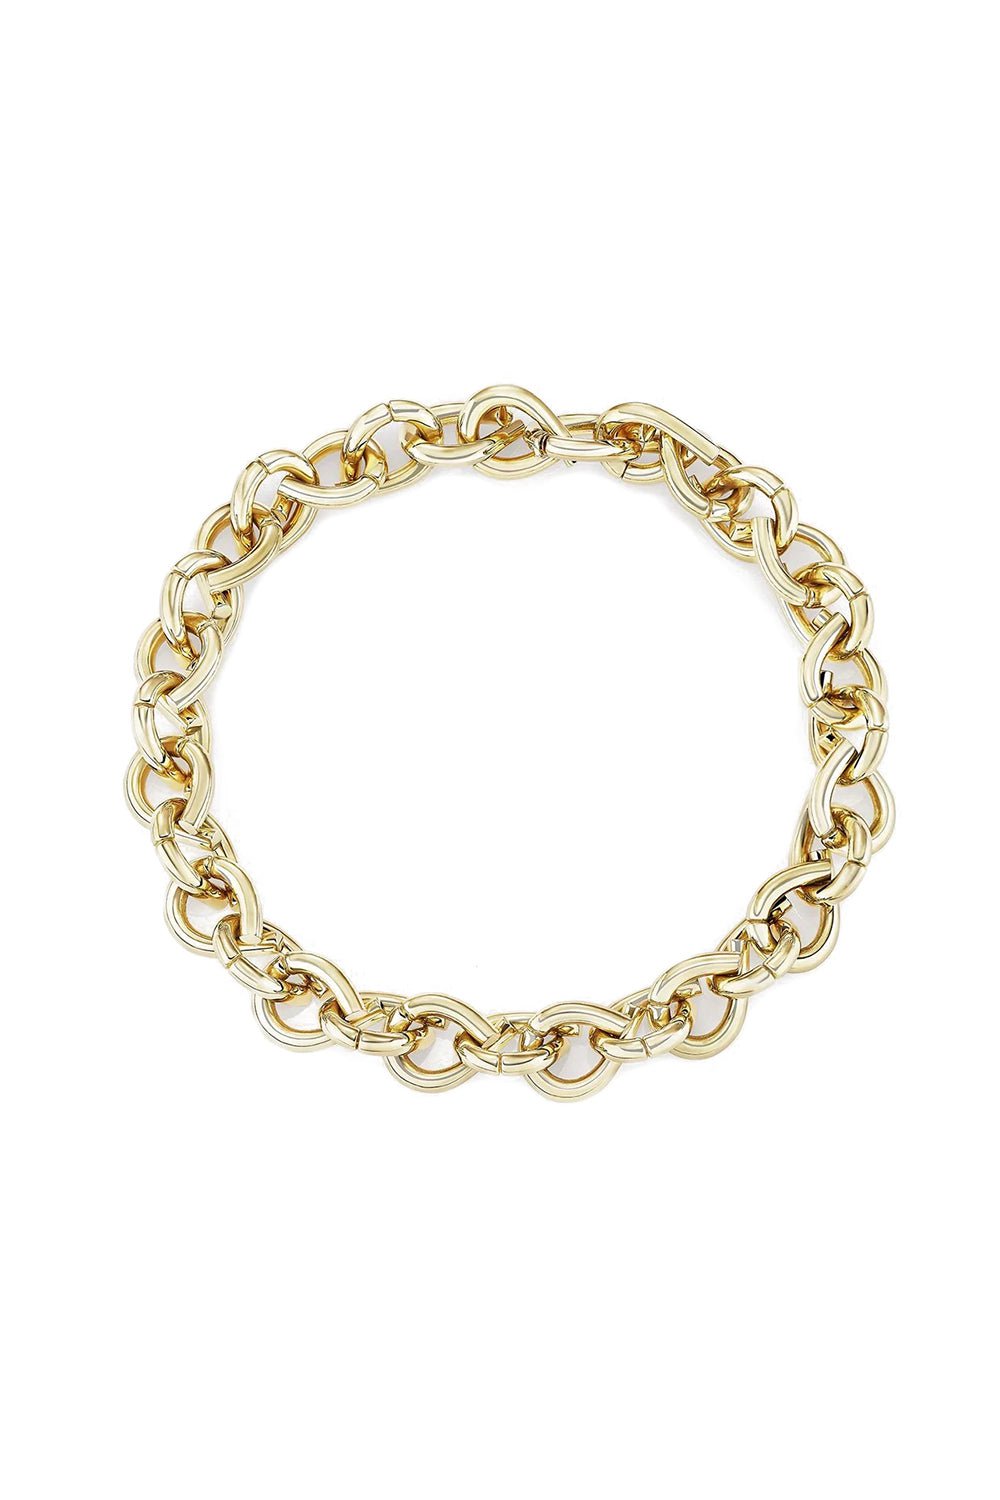 TABAYER-Oera Necklace-YELLOW GOLD